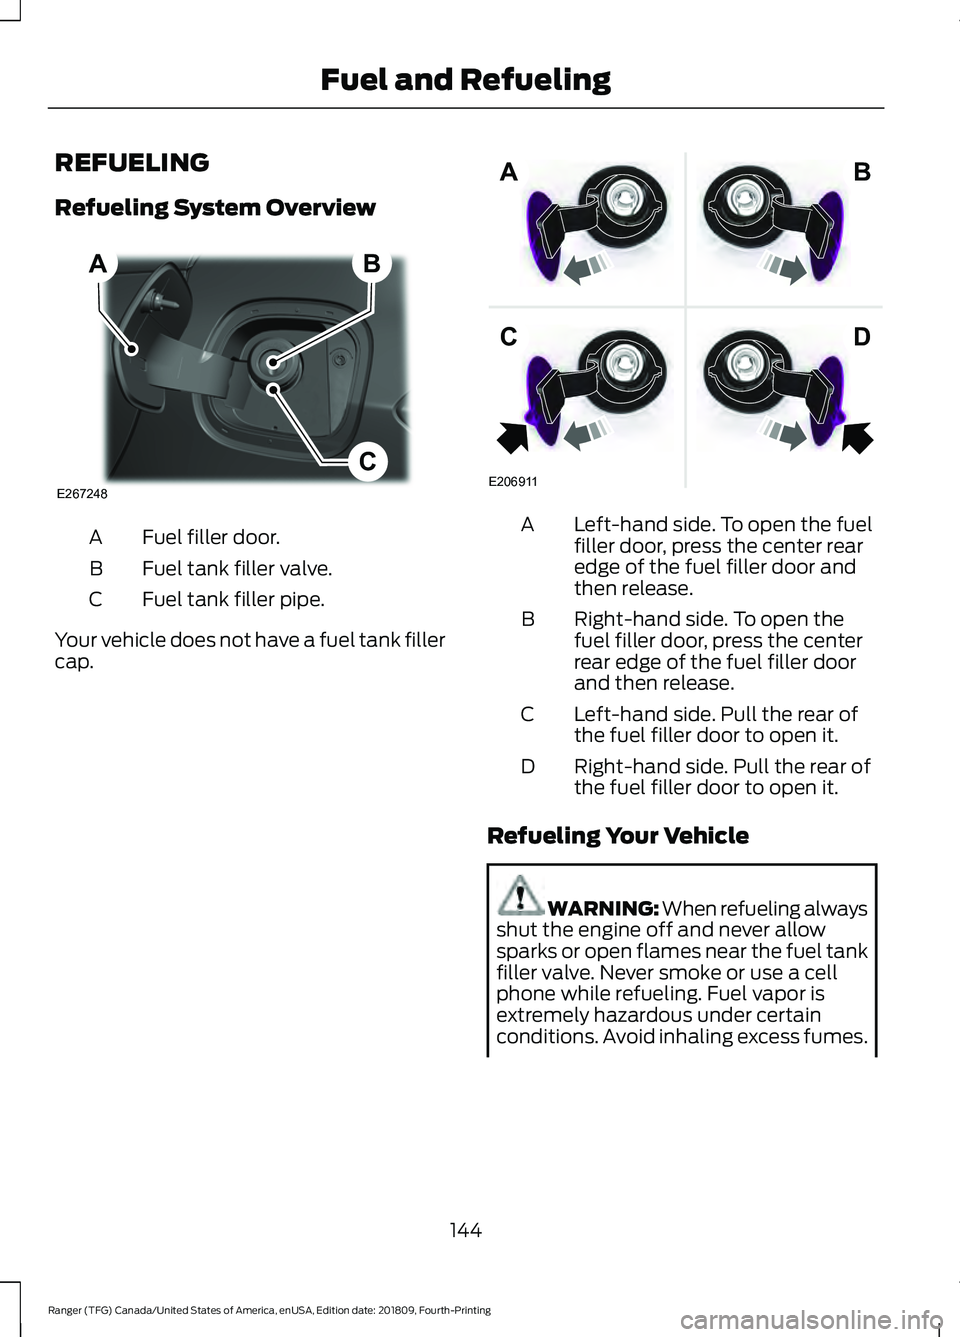 FORD RANGER 2019  Owners Manual REFUELING
Refueling System Overview
Fuel filler door.
A
Fuel tank filler valve.
B
Fuel tank filler pipe.
C
Your vehicle does not have a fuel tank filler
cap. Left-hand side. To open the fuel
filler do